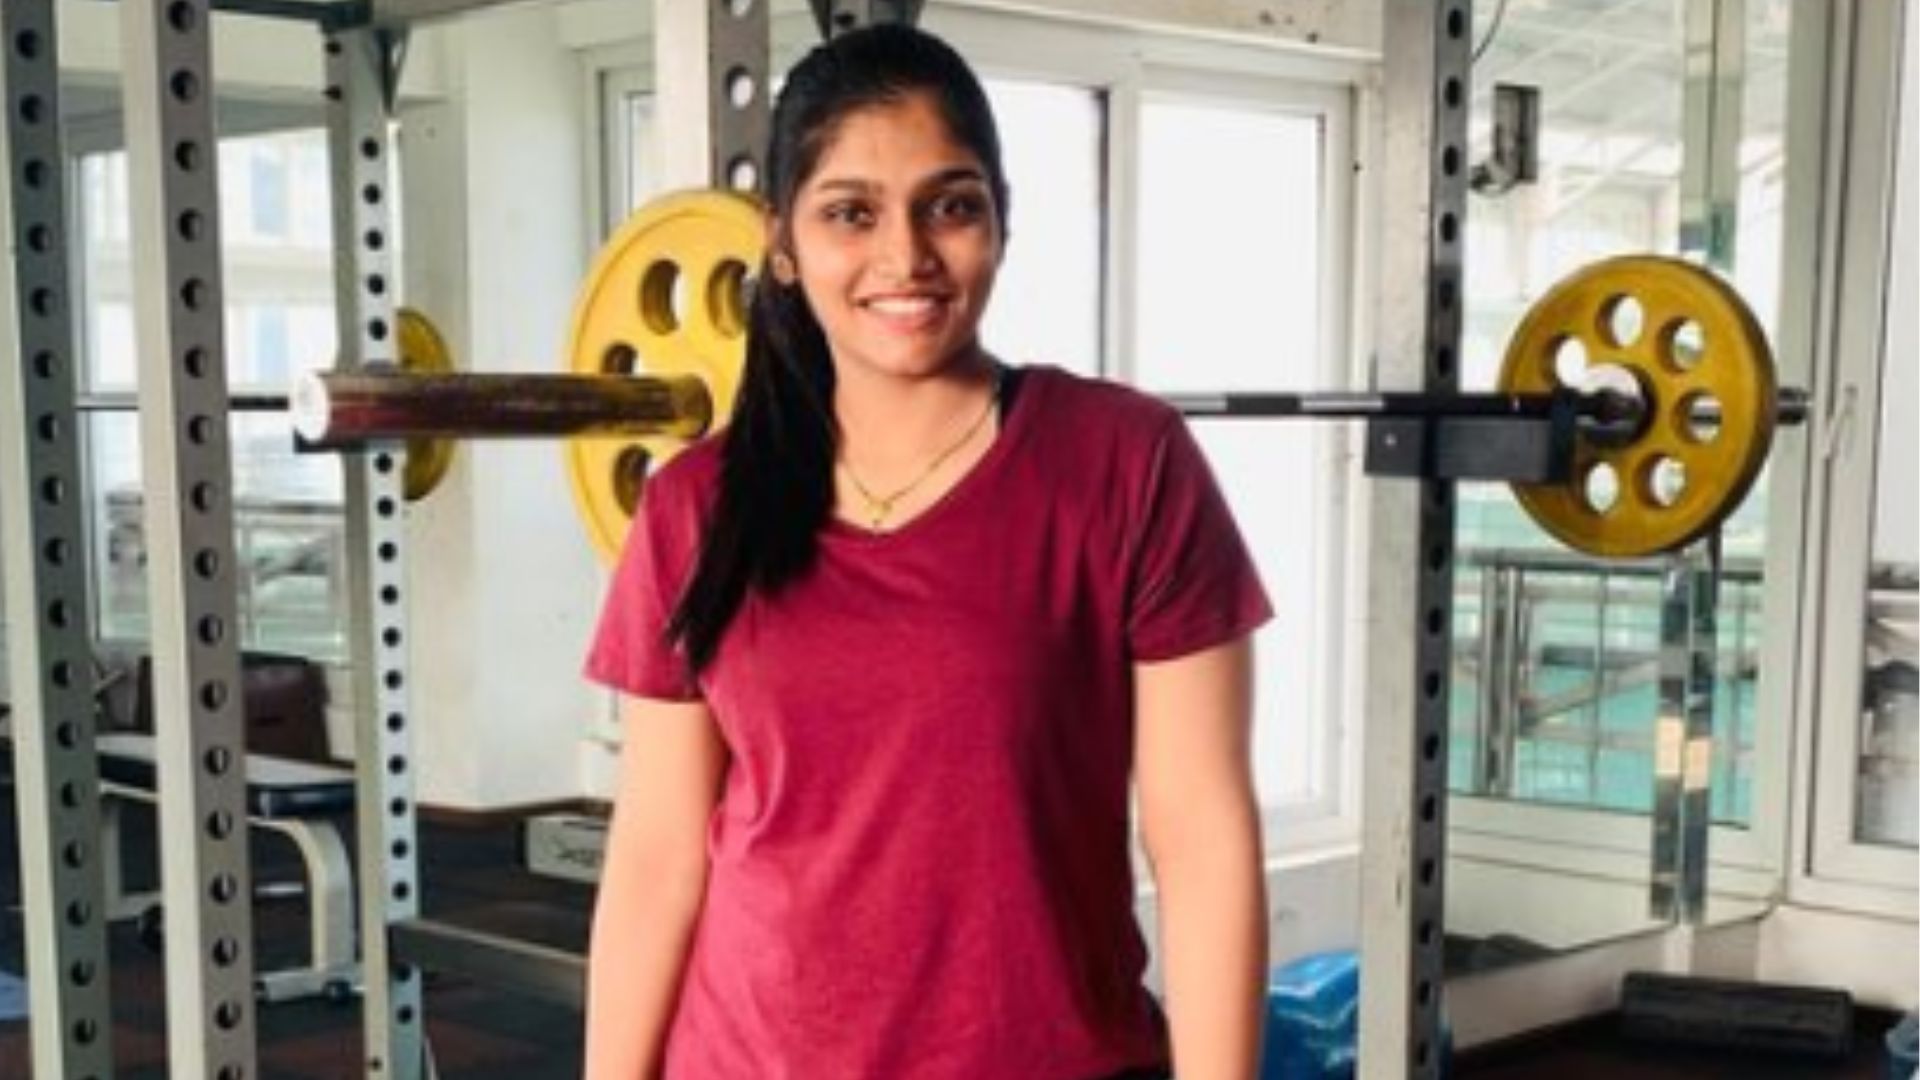 Cricketer Sneha Deepthi Plans On Becoming The First Player To Make A Comeback On The Field After Pregnancy. You Go, Mama!